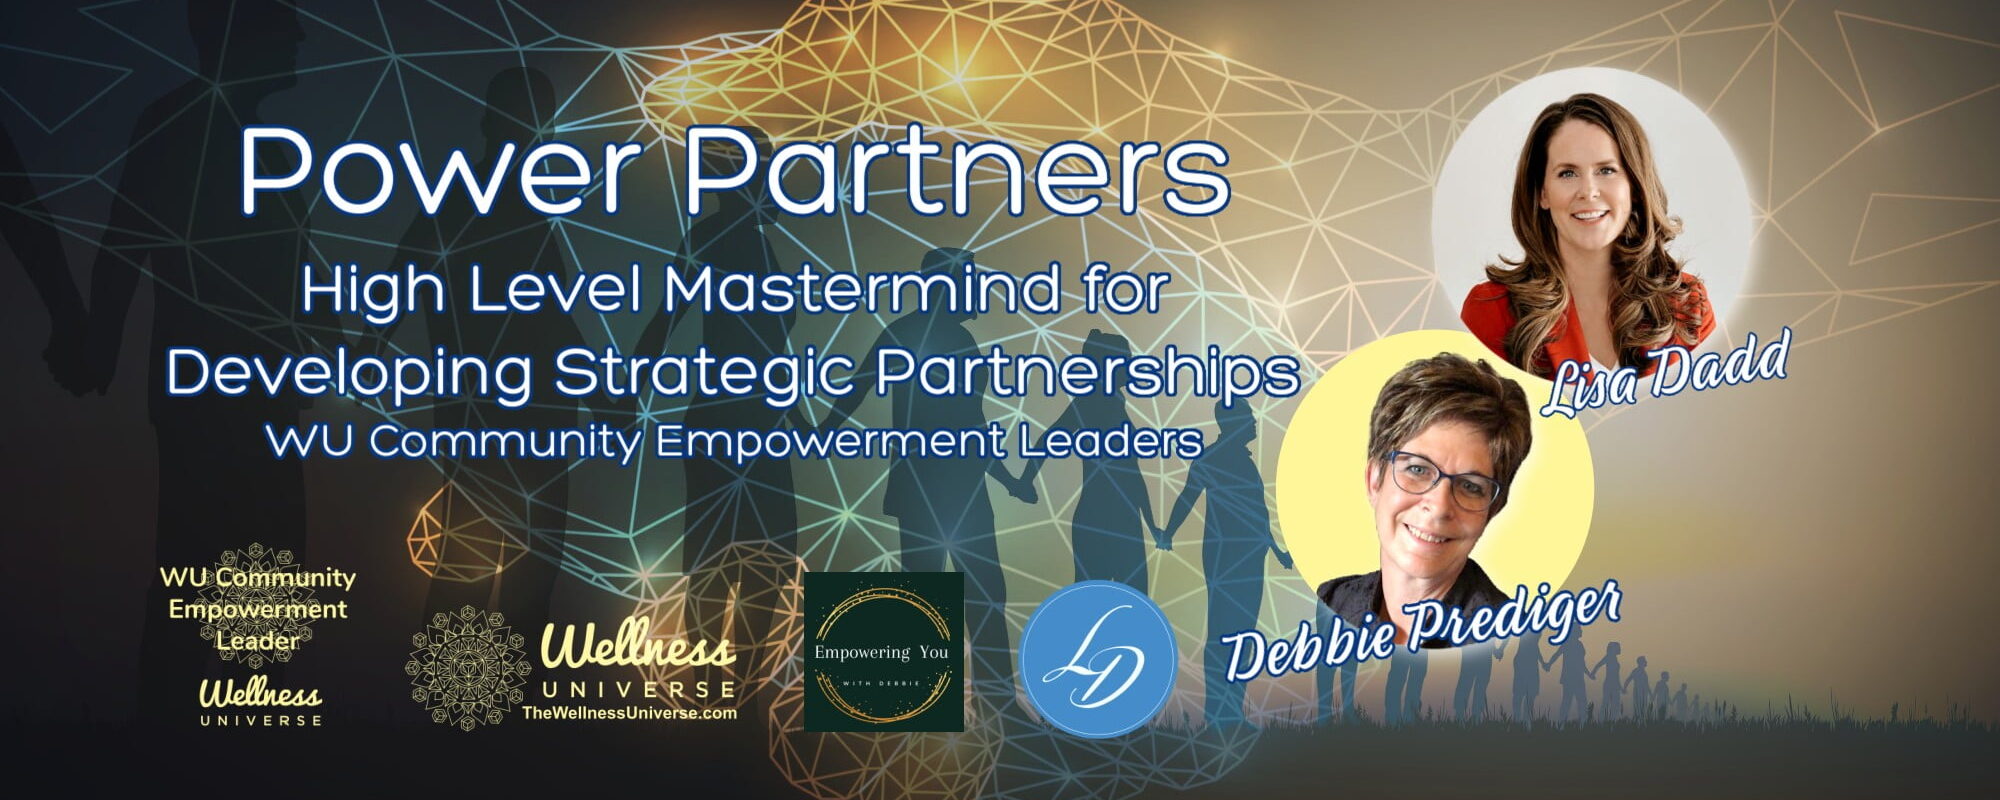 Power Partners with Lisa Dadd and Debbie Prediger